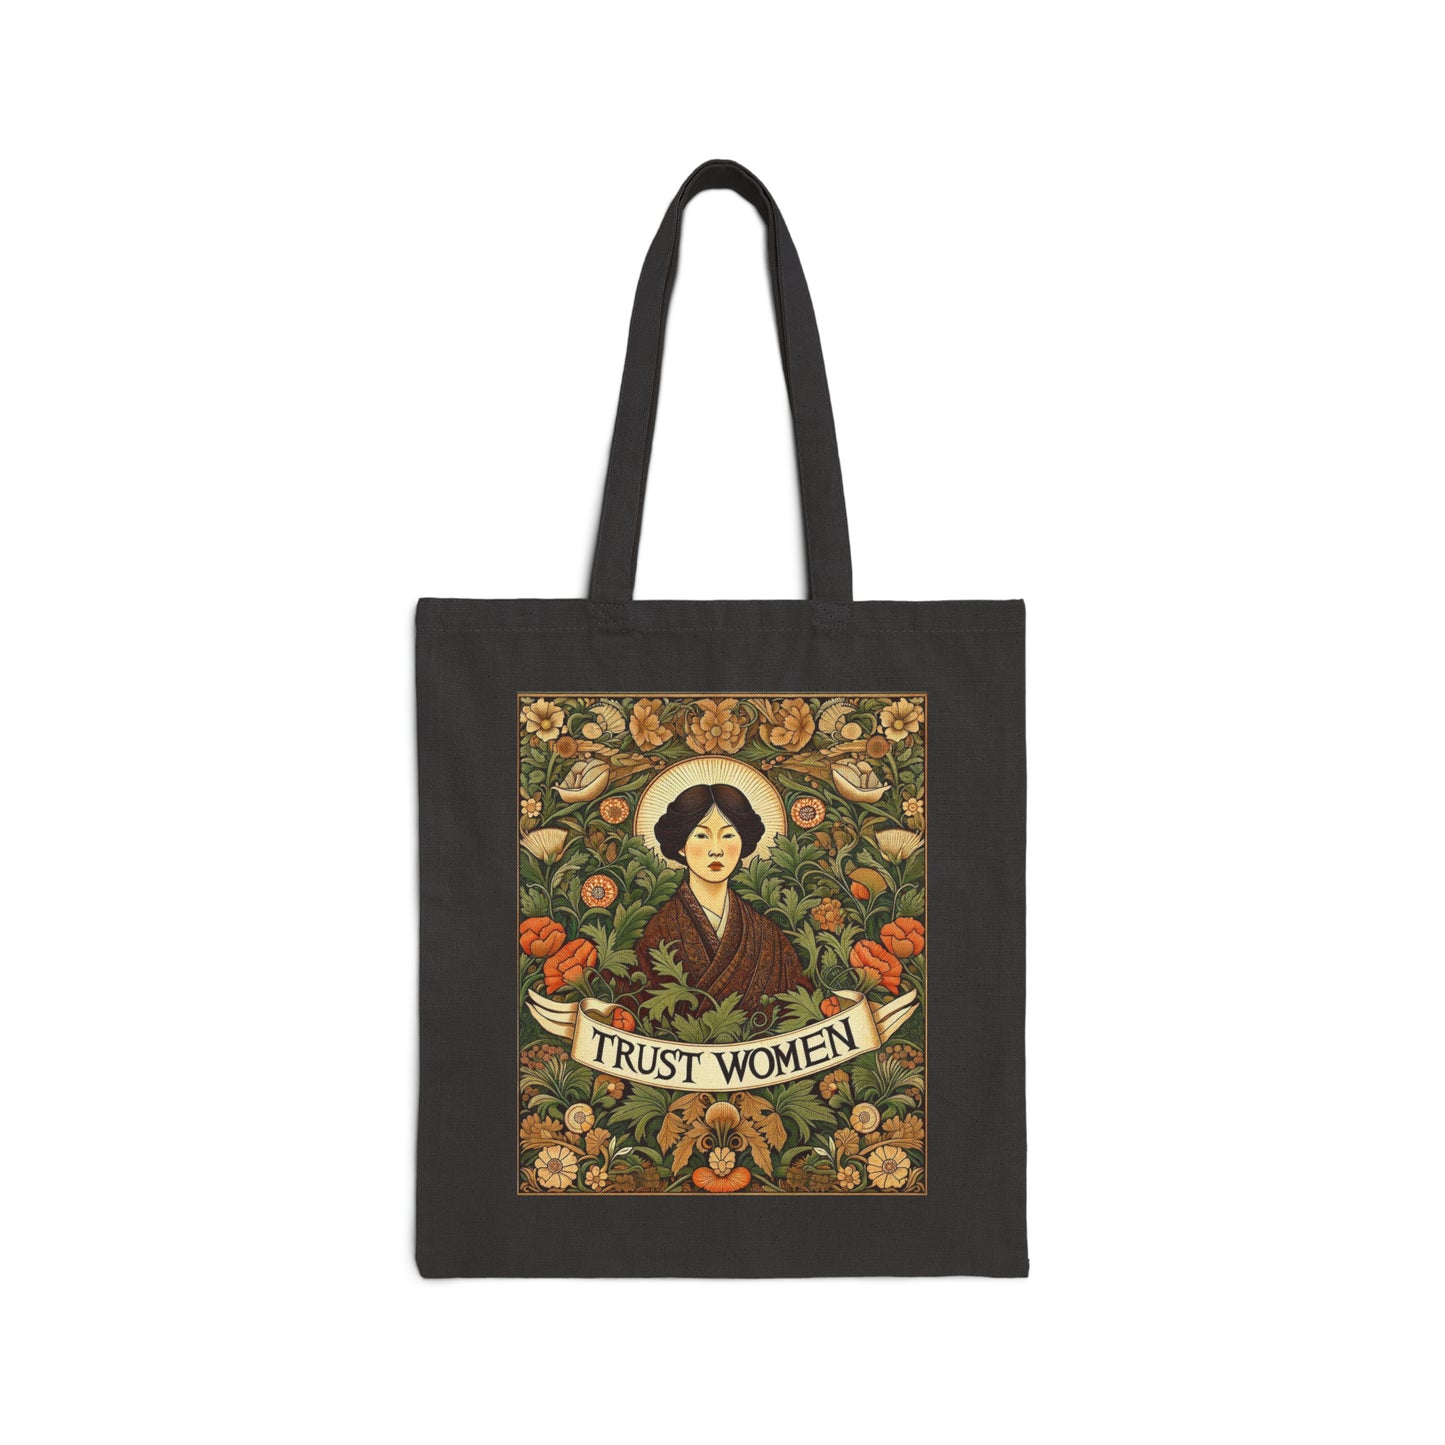 Inspirational Statement Cotton Cavas Tote Bag: Trust Women! & carry a laptop, kindle, phone, ipad, notebook goodies to work/coffee shop